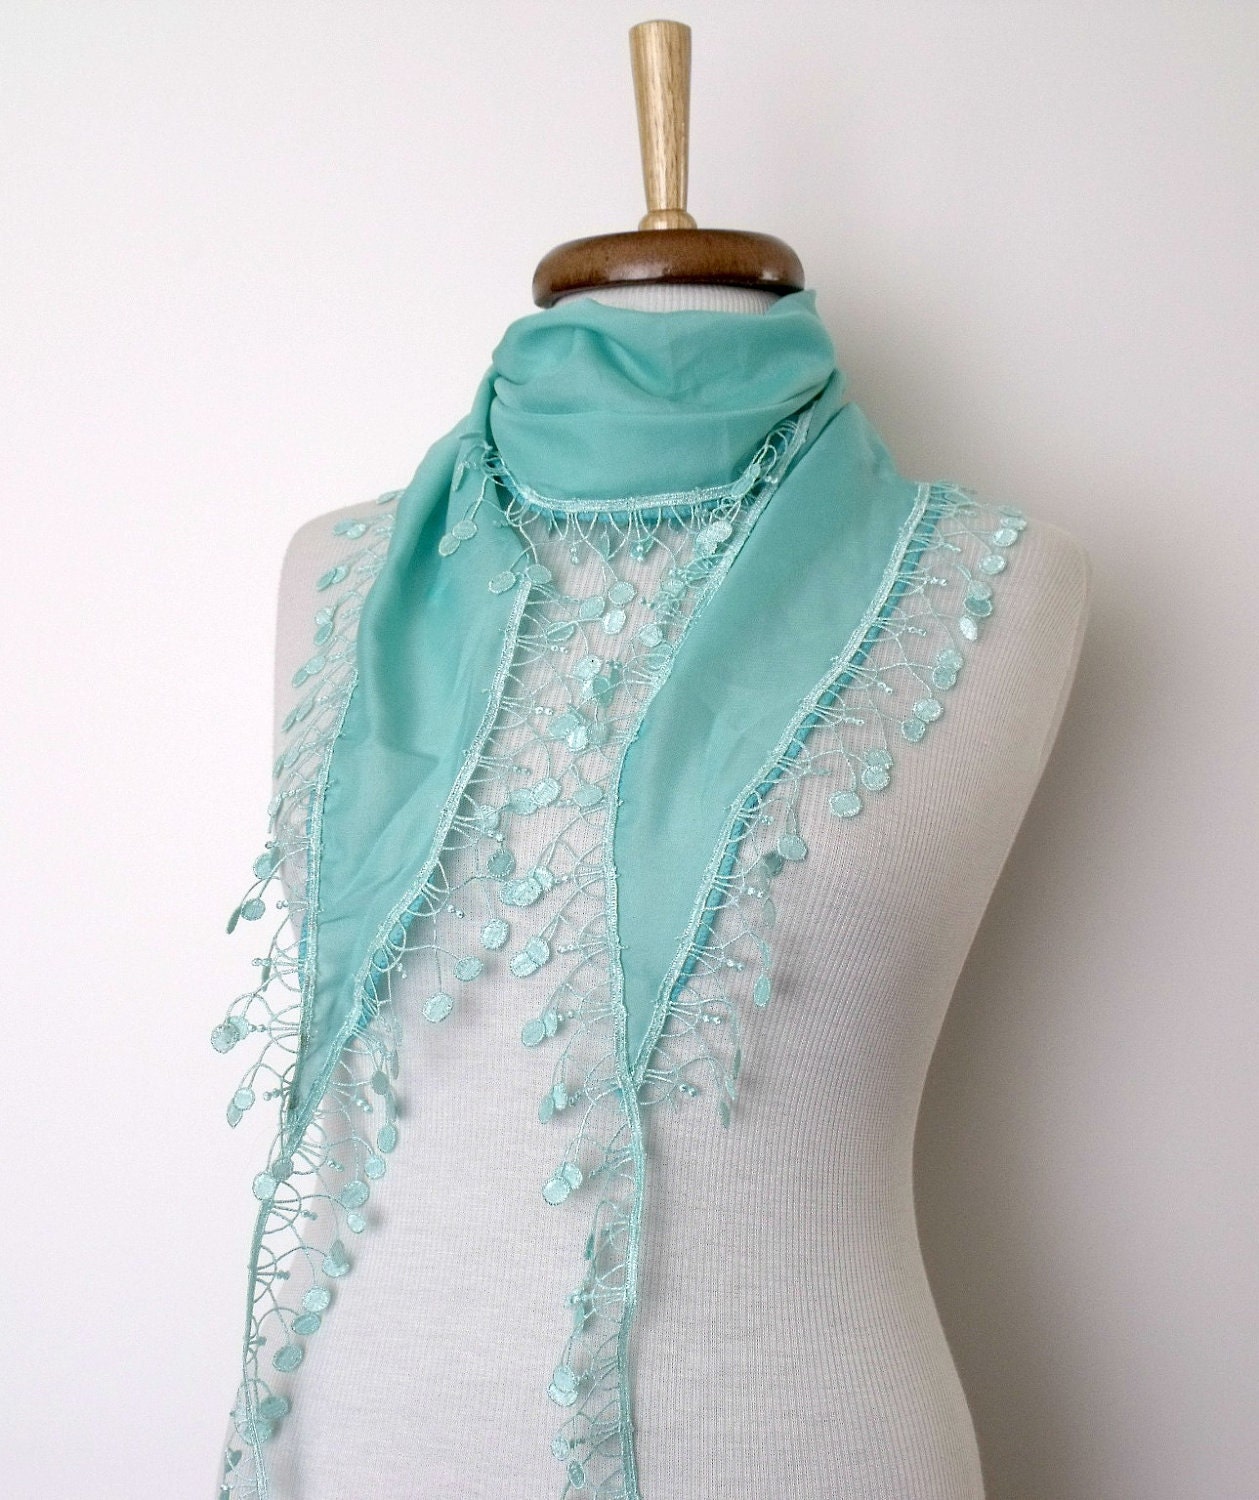 Mediumturquoise Scarf-Lace Edge-Ready for shipping-Spring and